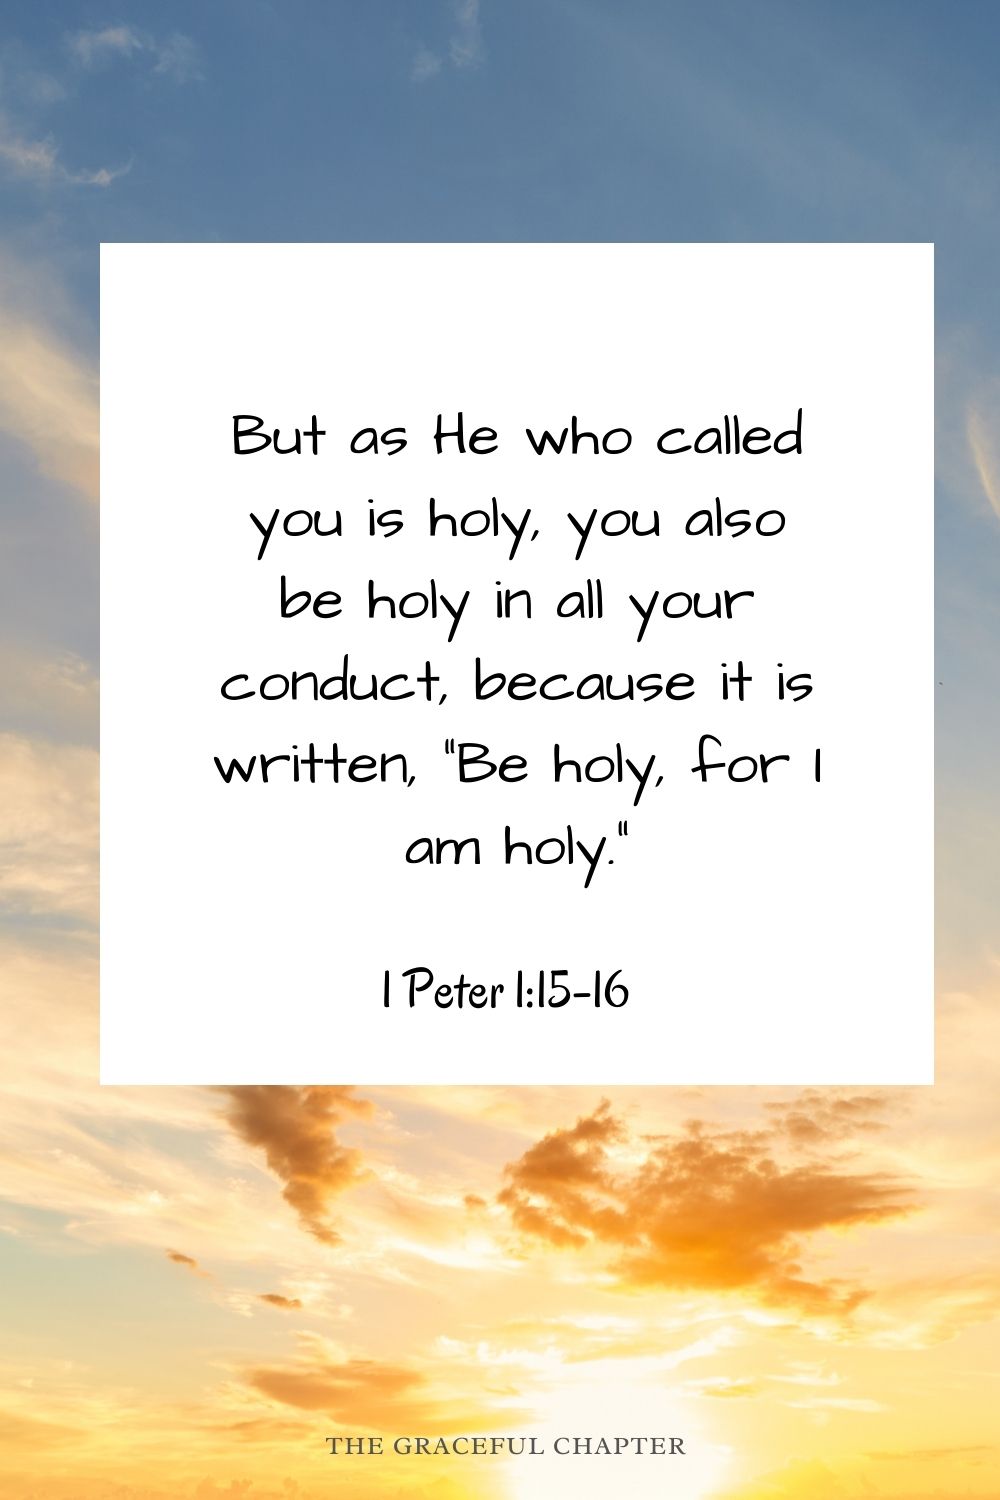 But as He who called you is holy, you also be holy in all your conduct, because it is written, “Be holy, for I am holy.” 1 Peter 1:15-16